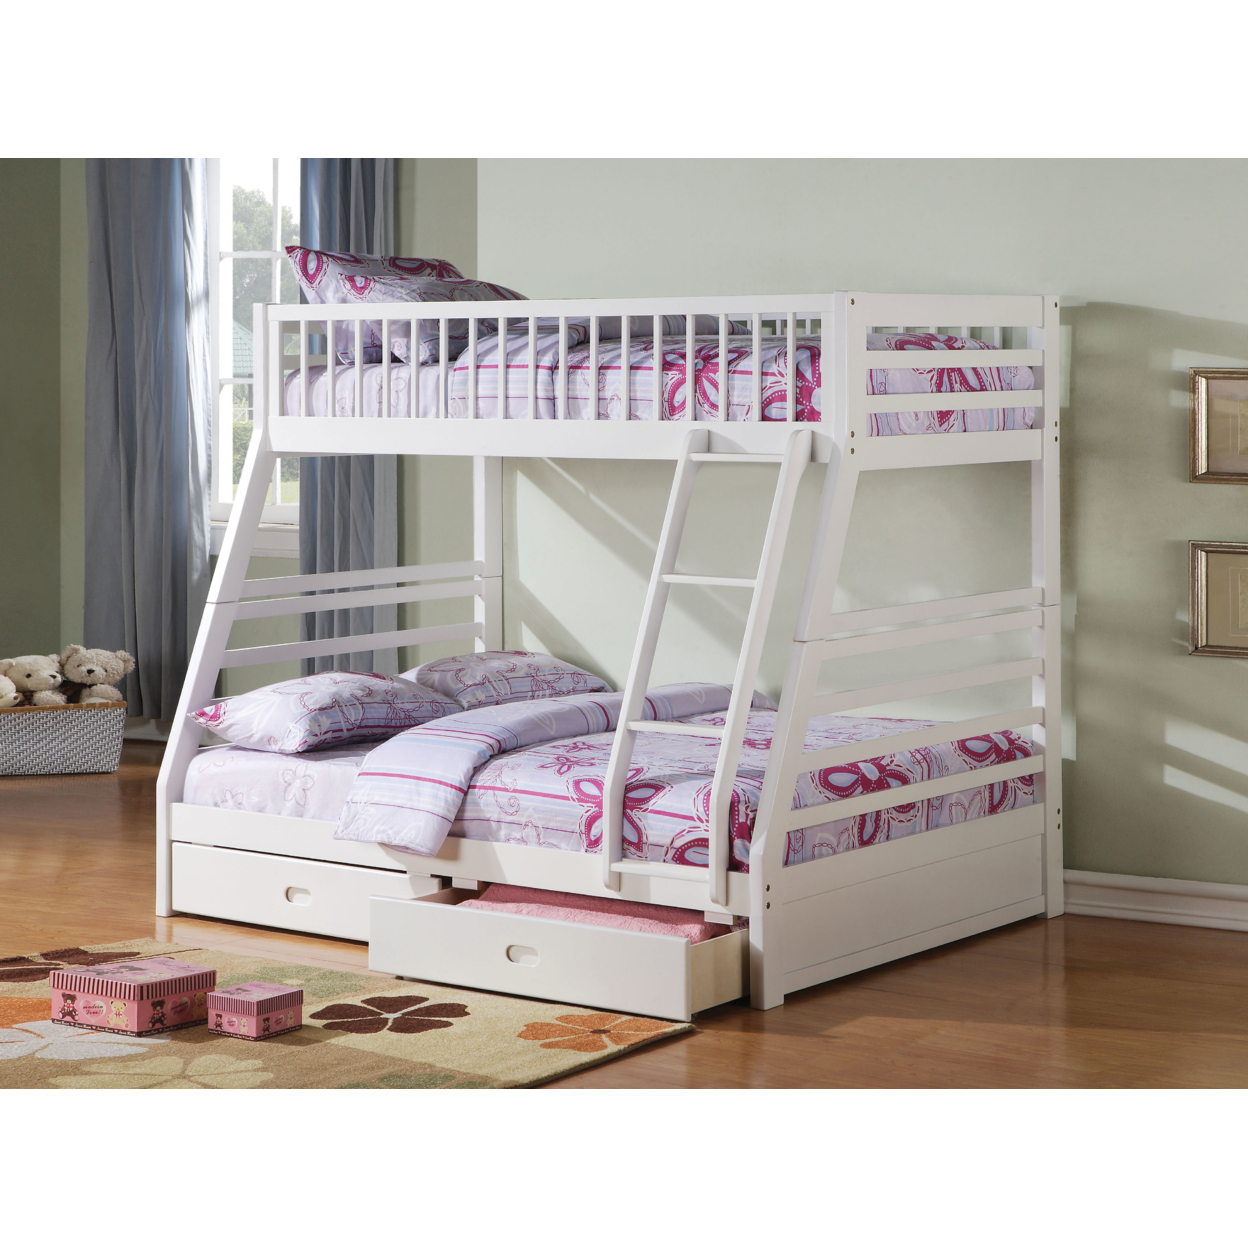 Wooden Twin Full Bunk Bed With Drawers, White- Saltoro Sherpi